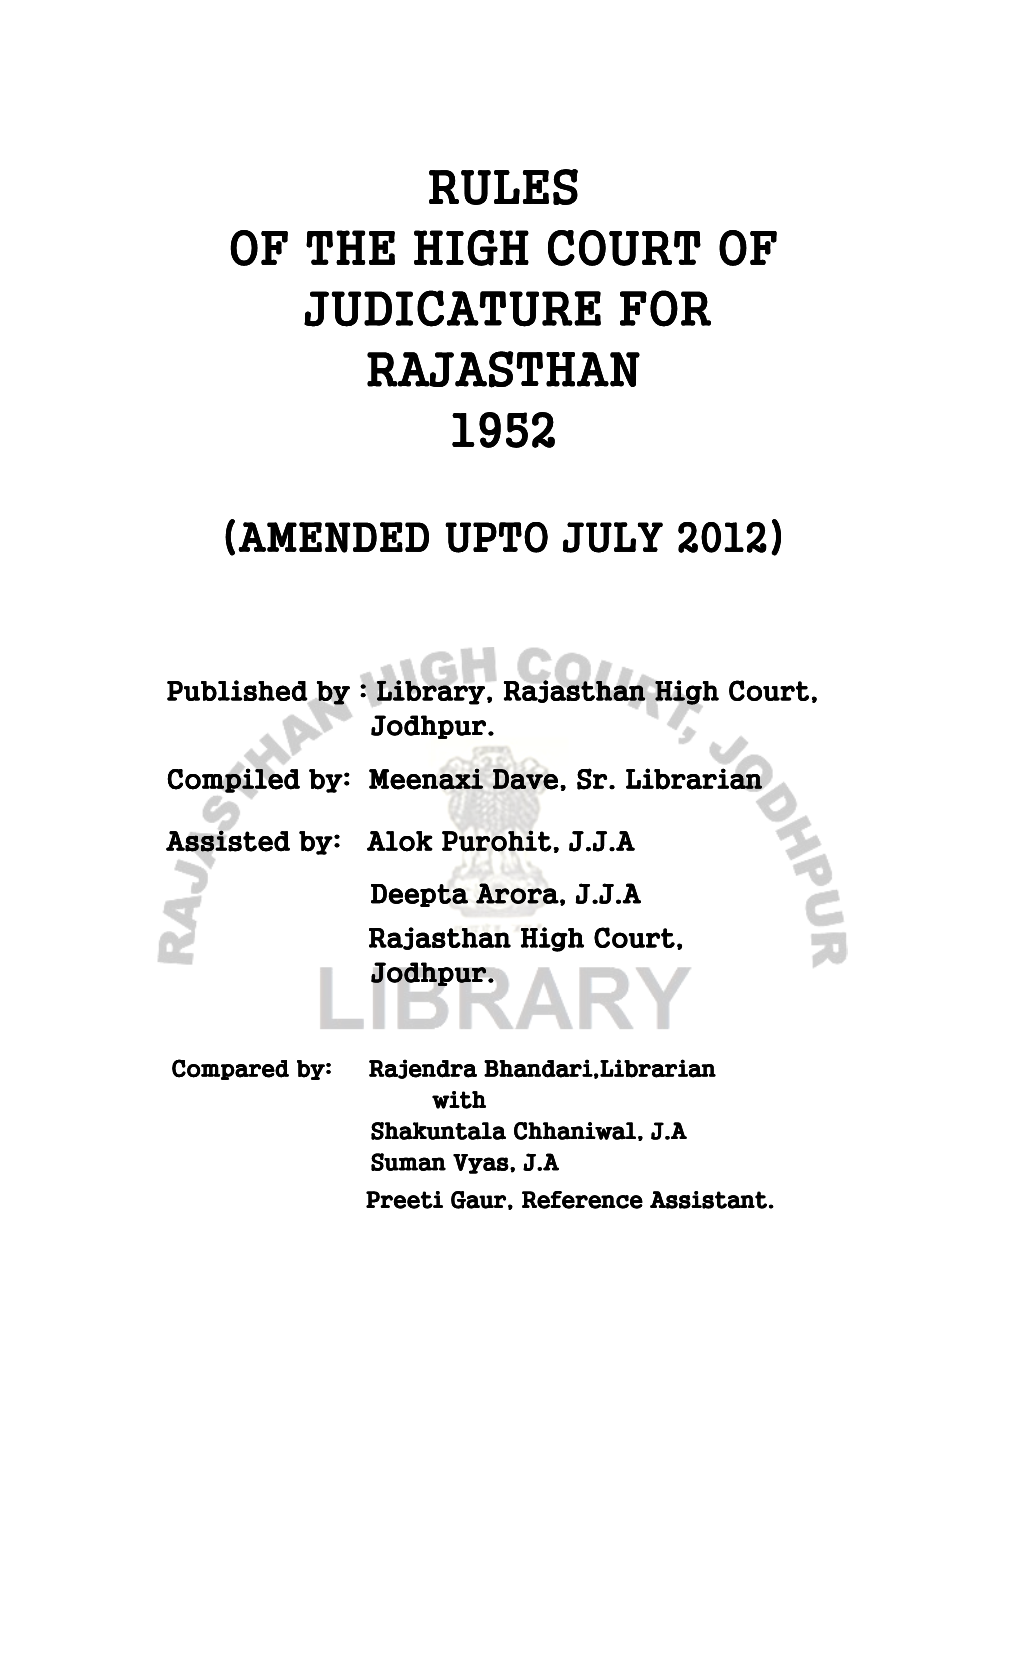 Rules of the High Court of Judicature for Rajasthan, 1952